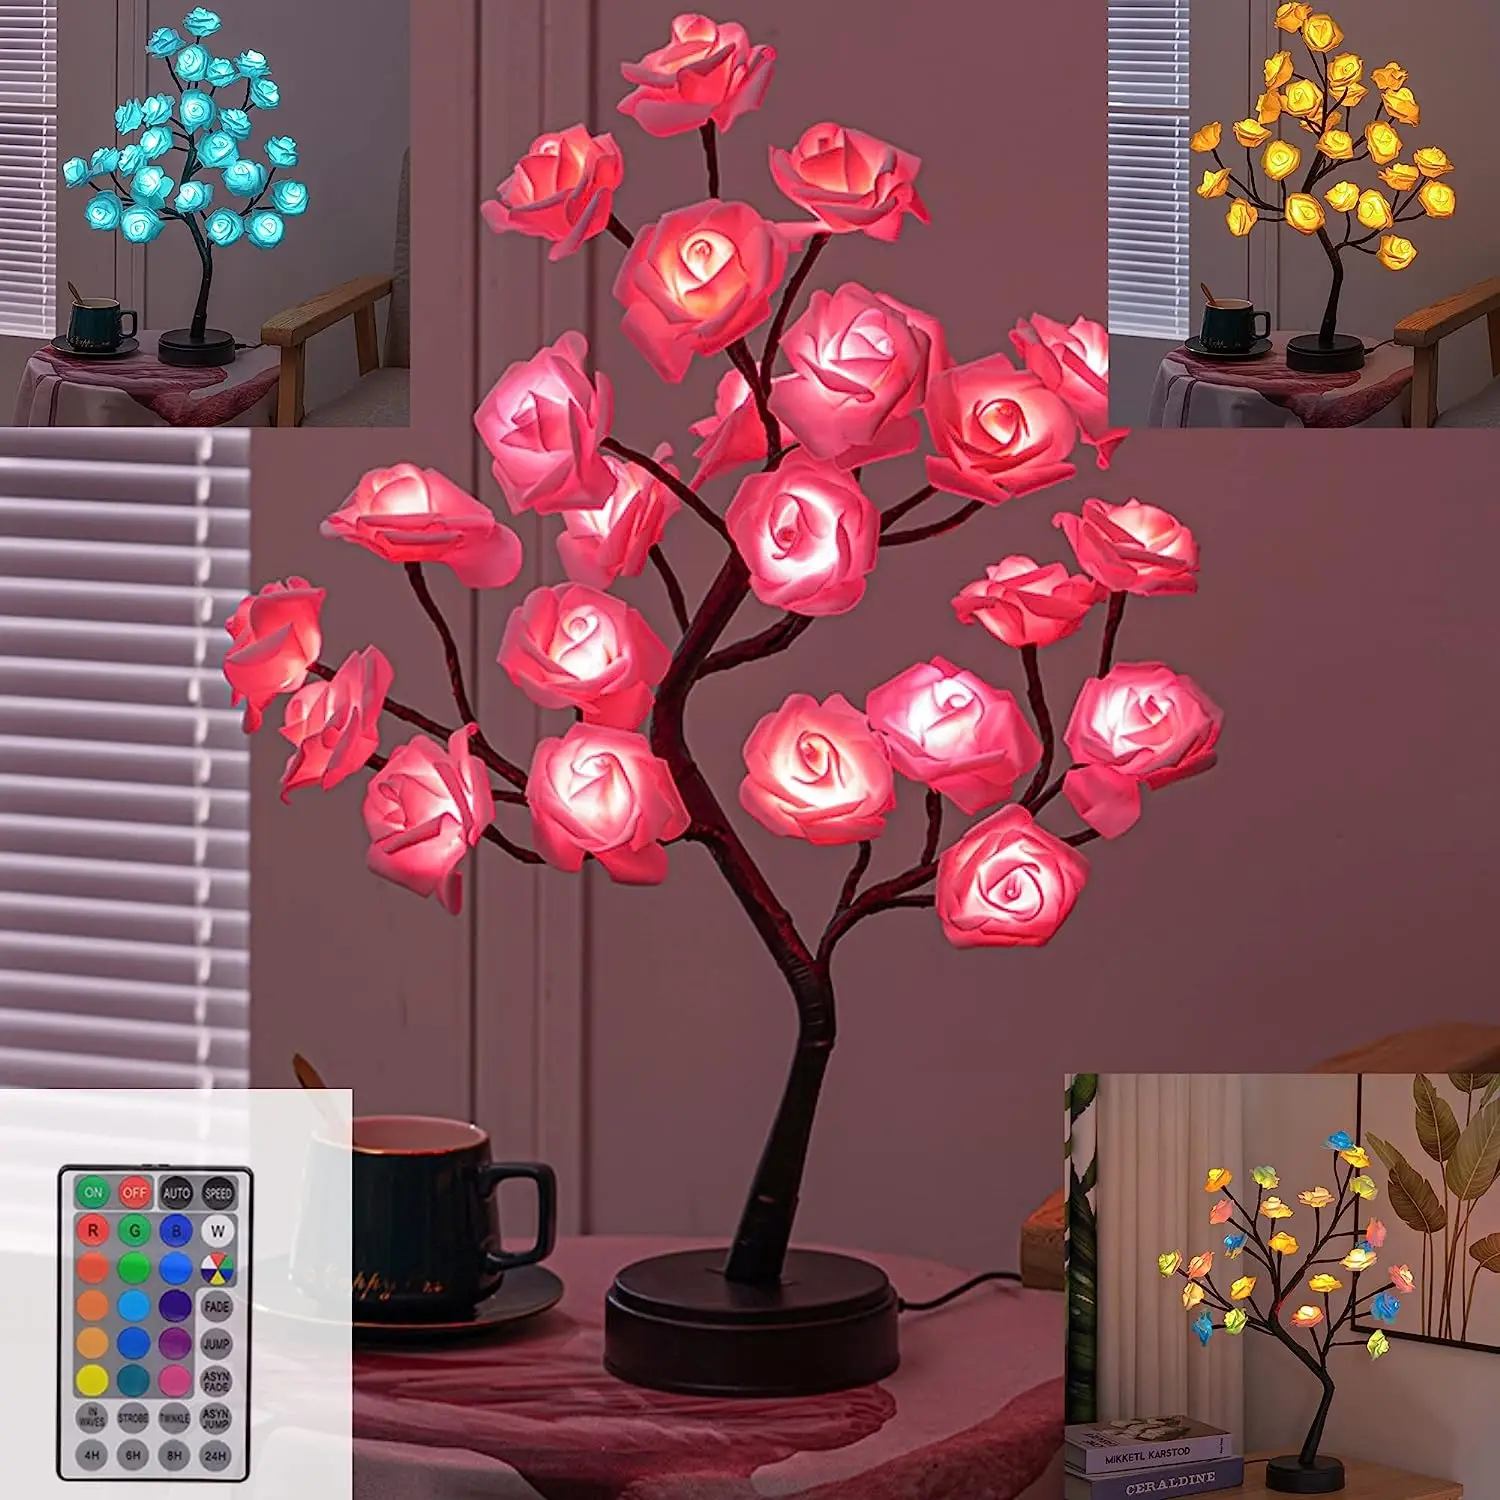 RGB Rose Flower Tree Lights 24LED USB Battery Table Lamp Fairy Night Light Home Party Christmas Wedding Bedroom Decoration Gift rose flower tree lights led table lamp usb battery night lights home table decoration xmas christmas wedding bedroom decorative